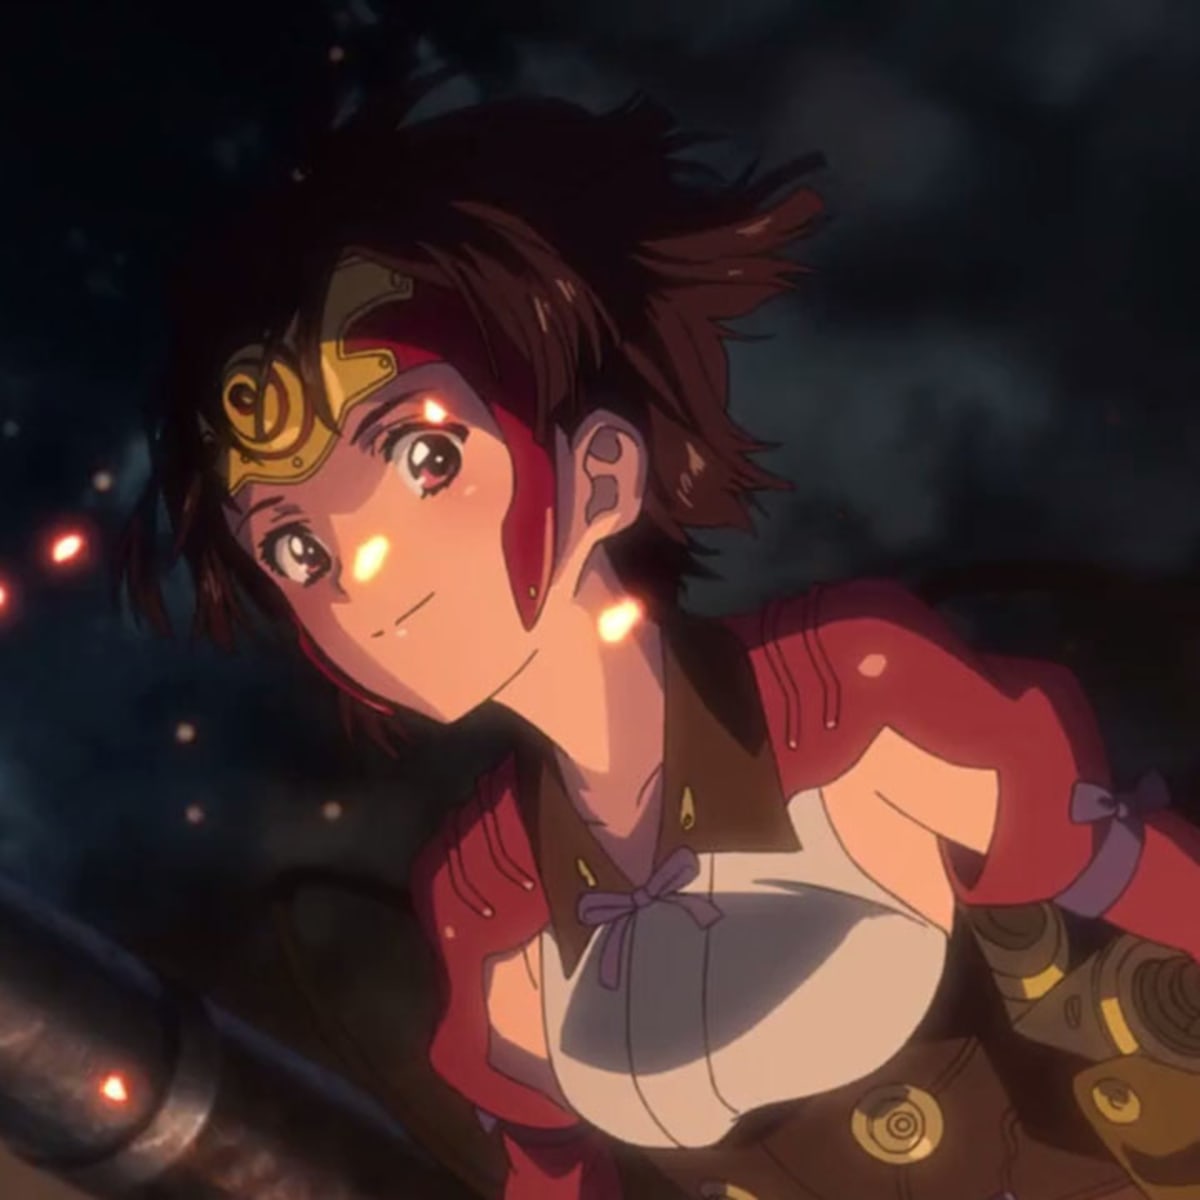 Reaper S Reviews Kabaneri Of The Iron Fortress Reelrundown Entertainment